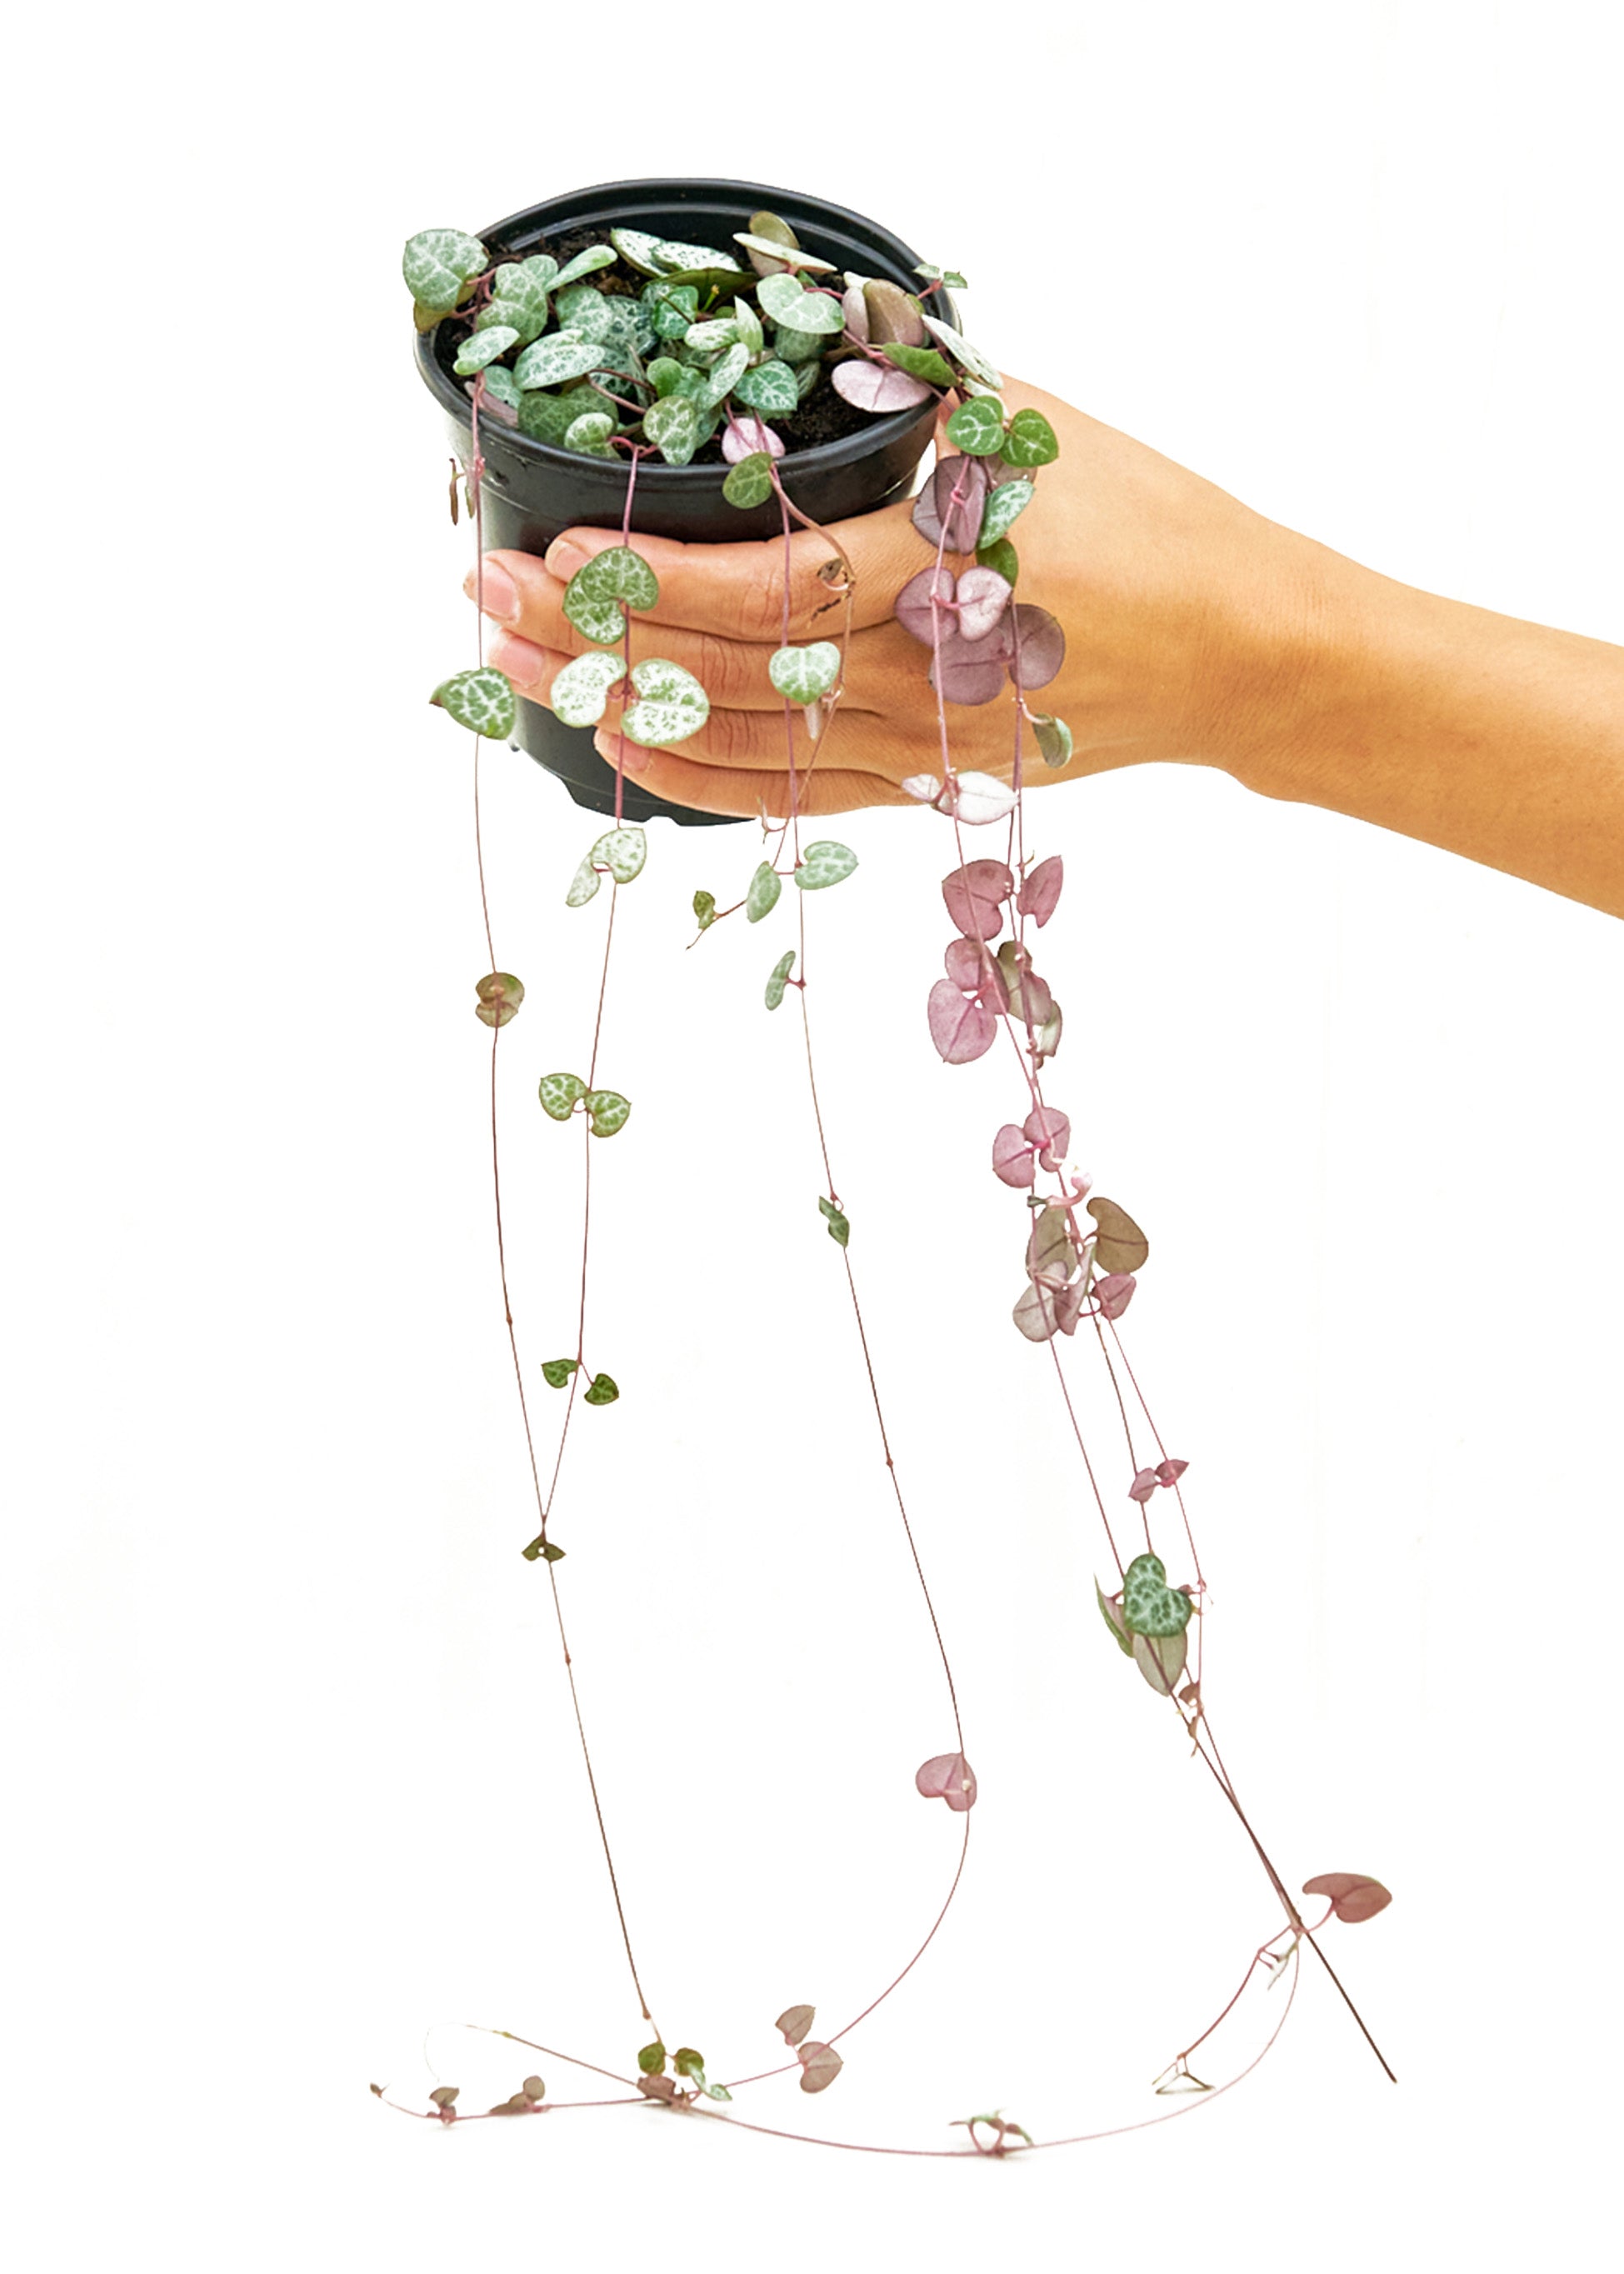 Small size String of Hearts Plant in a growers pot with a white background with a hand holding the pot showing the top view